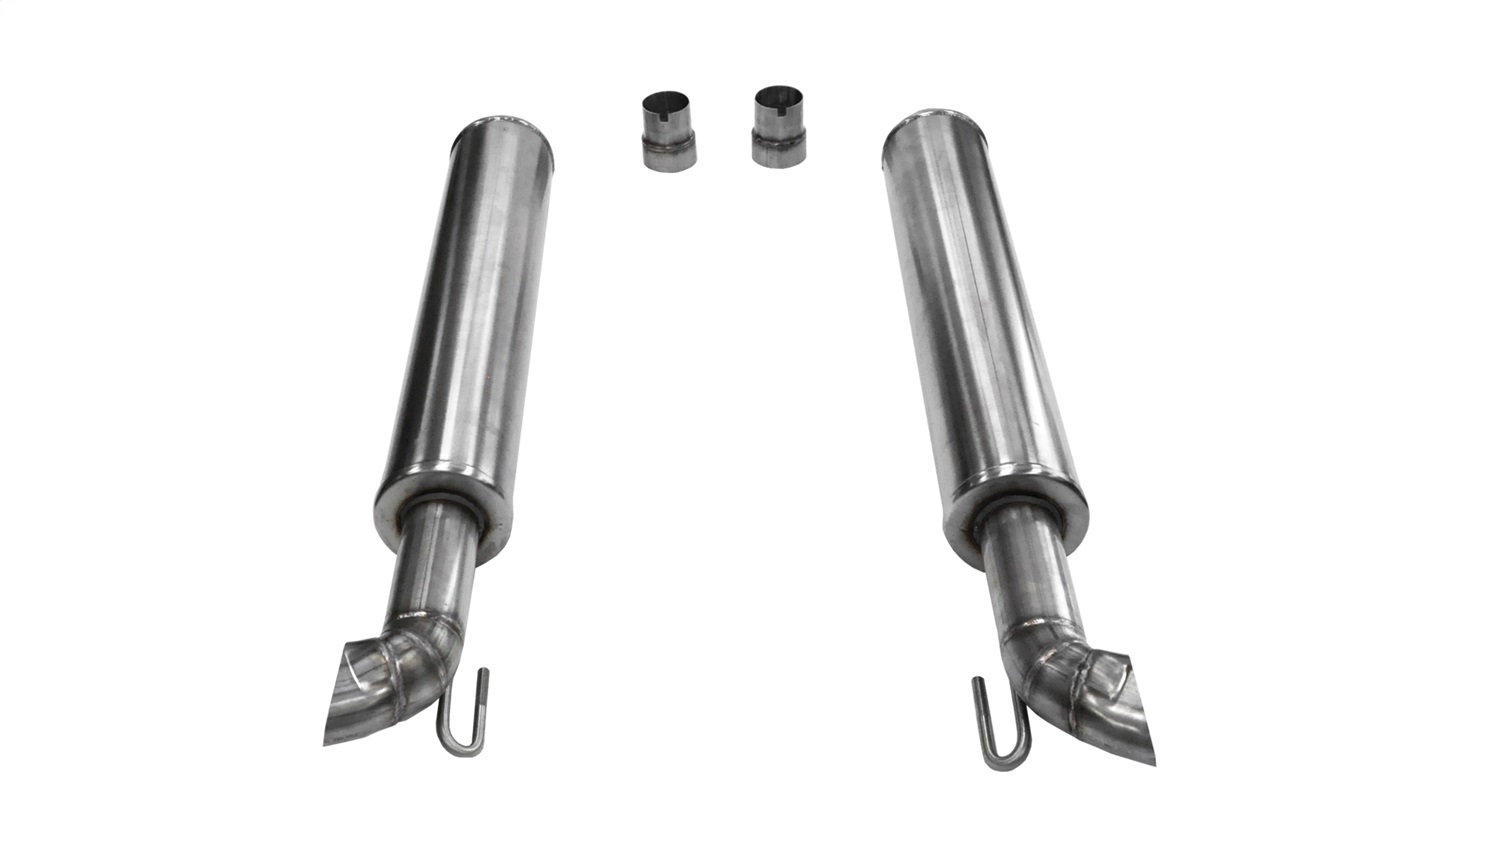 Corsa Performance 14416 Xtreme Cat-Back Exhaust System Fits 13-17 Viper